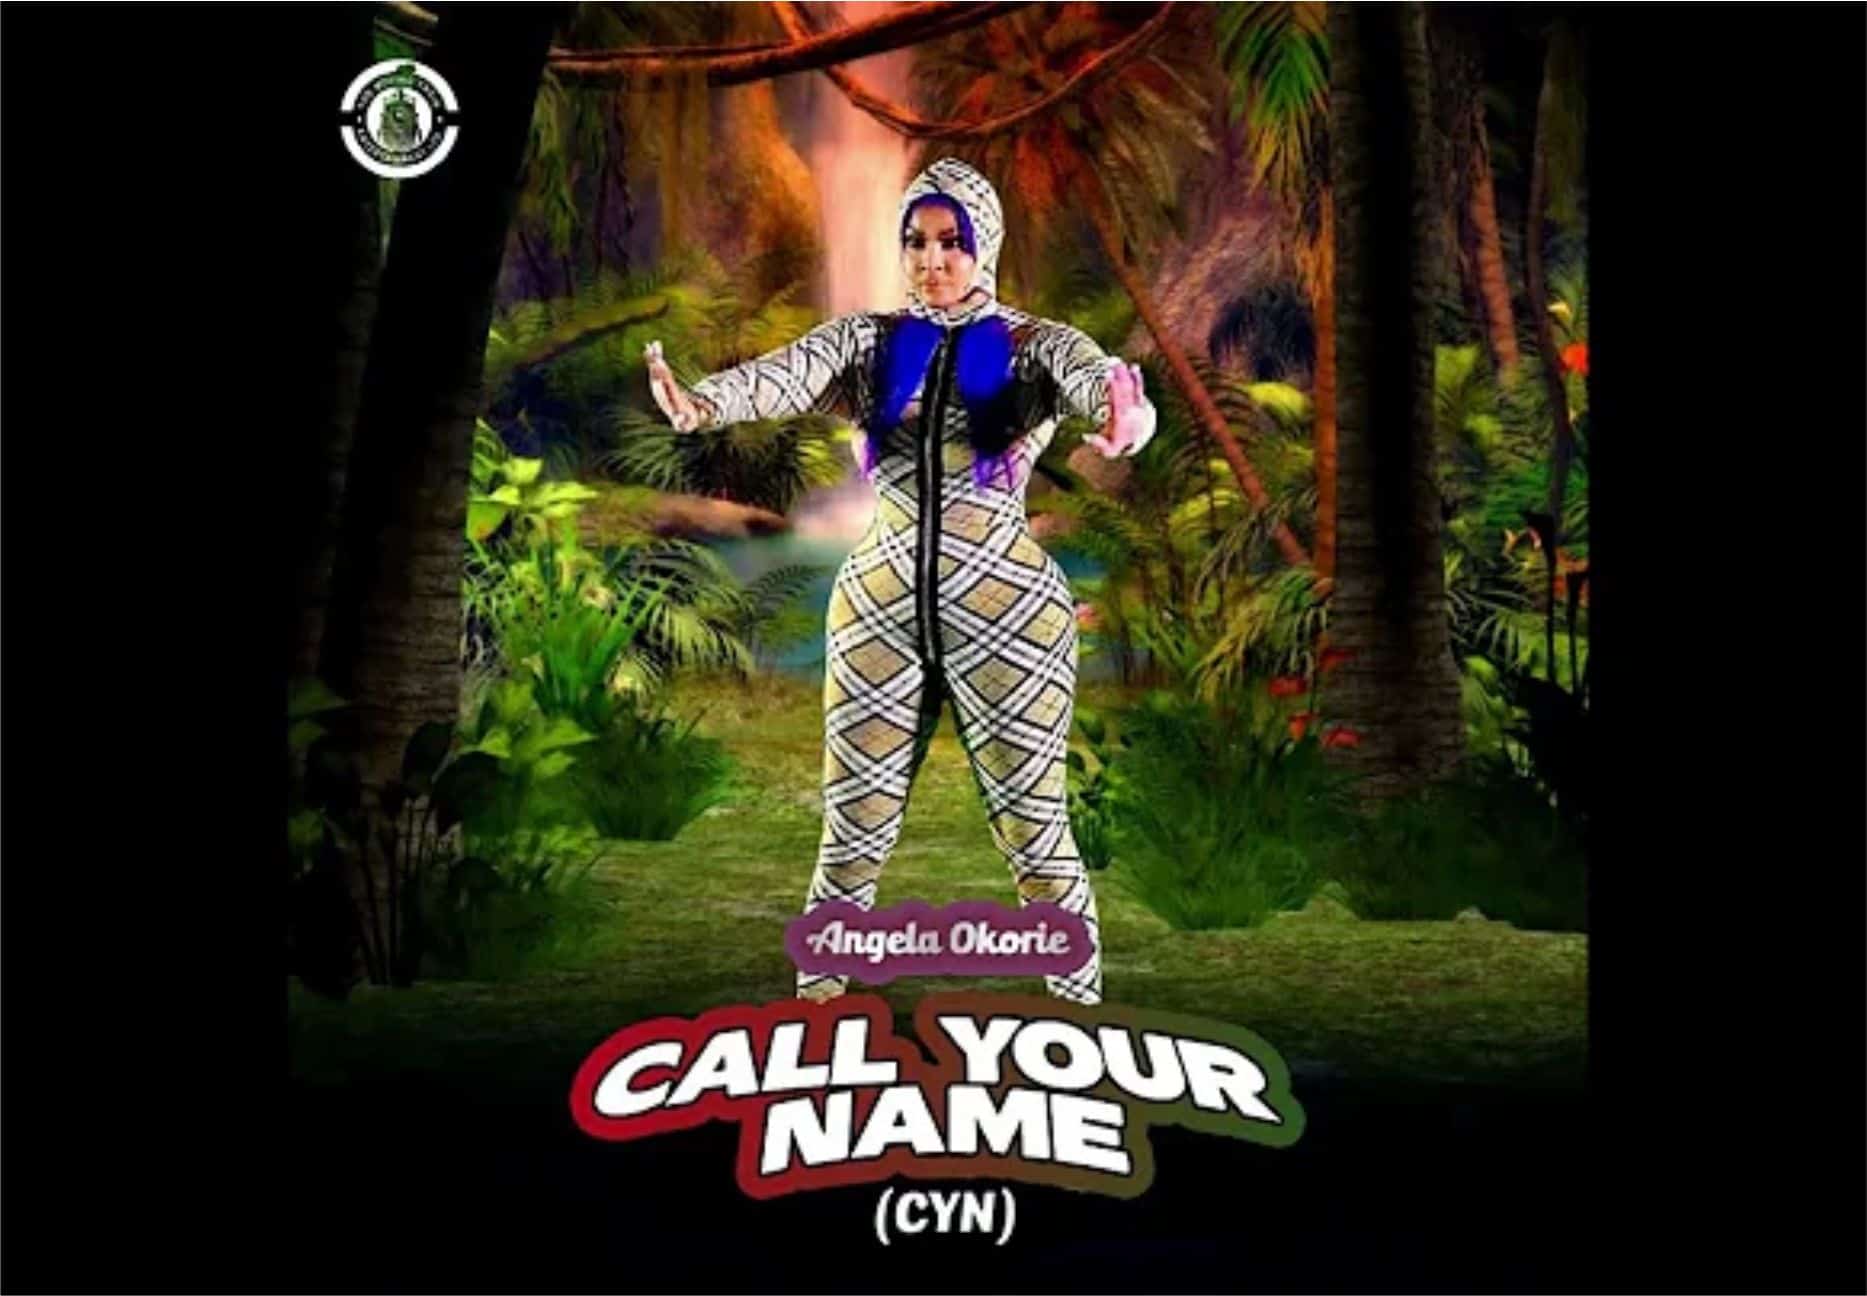 Download Music: Angela Okorie – Call Your Name (CYN)